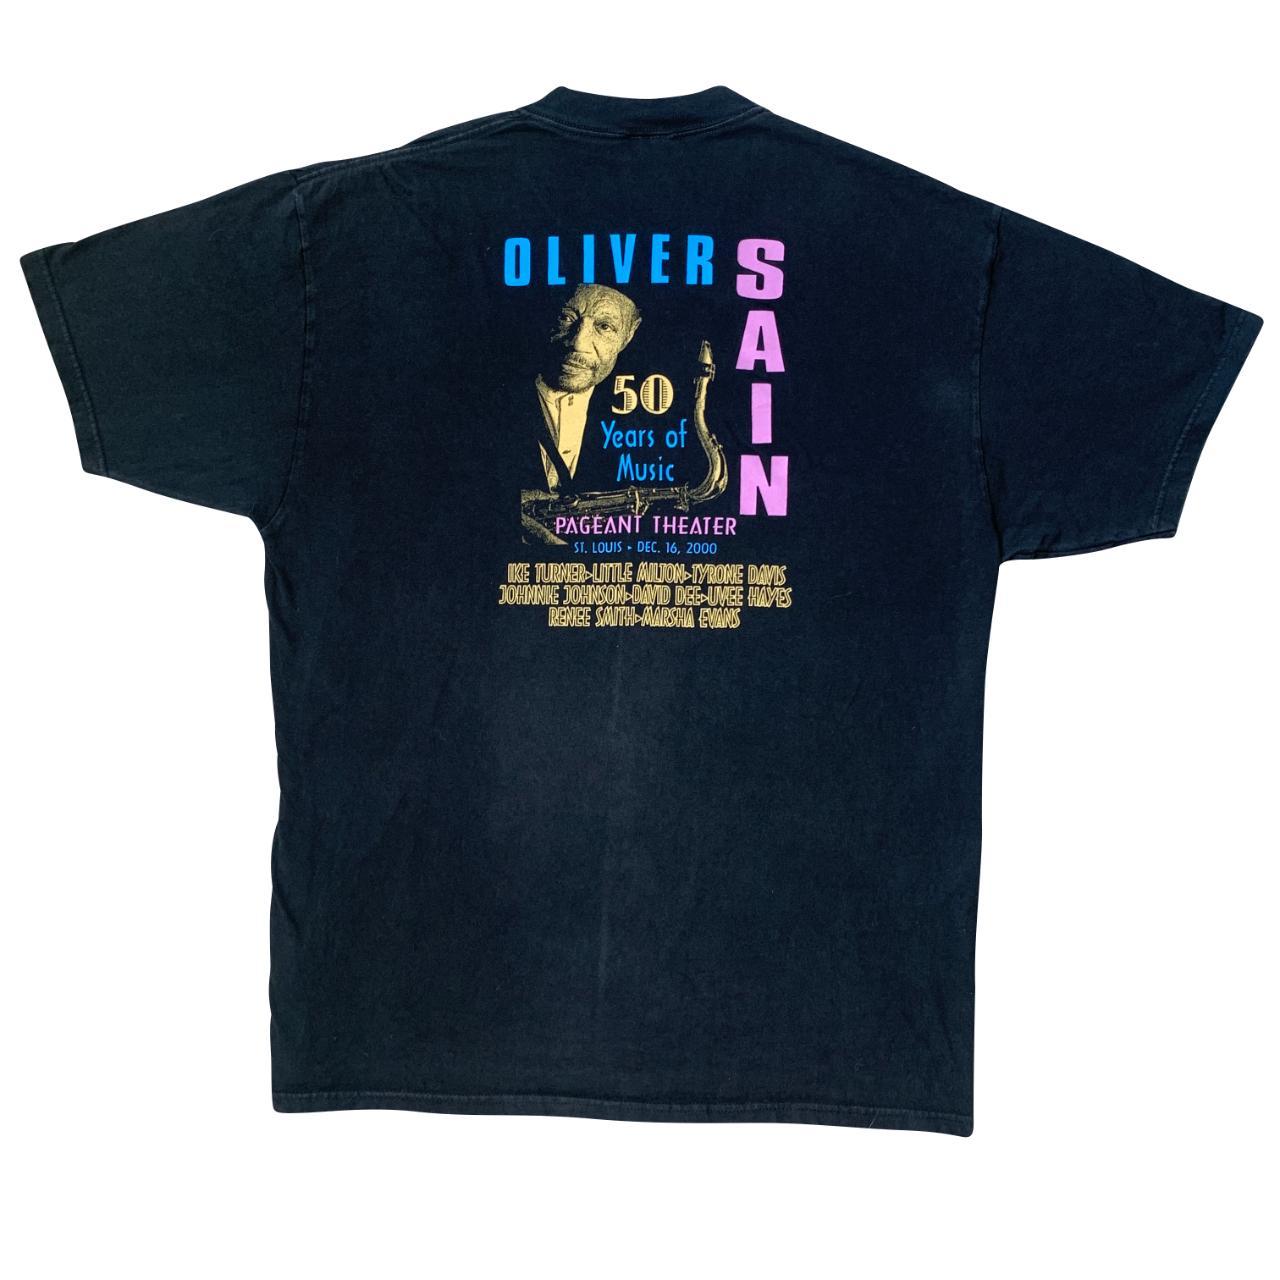 Rare Oliver Sain concert tee shirt for a 50 years of... - Depop